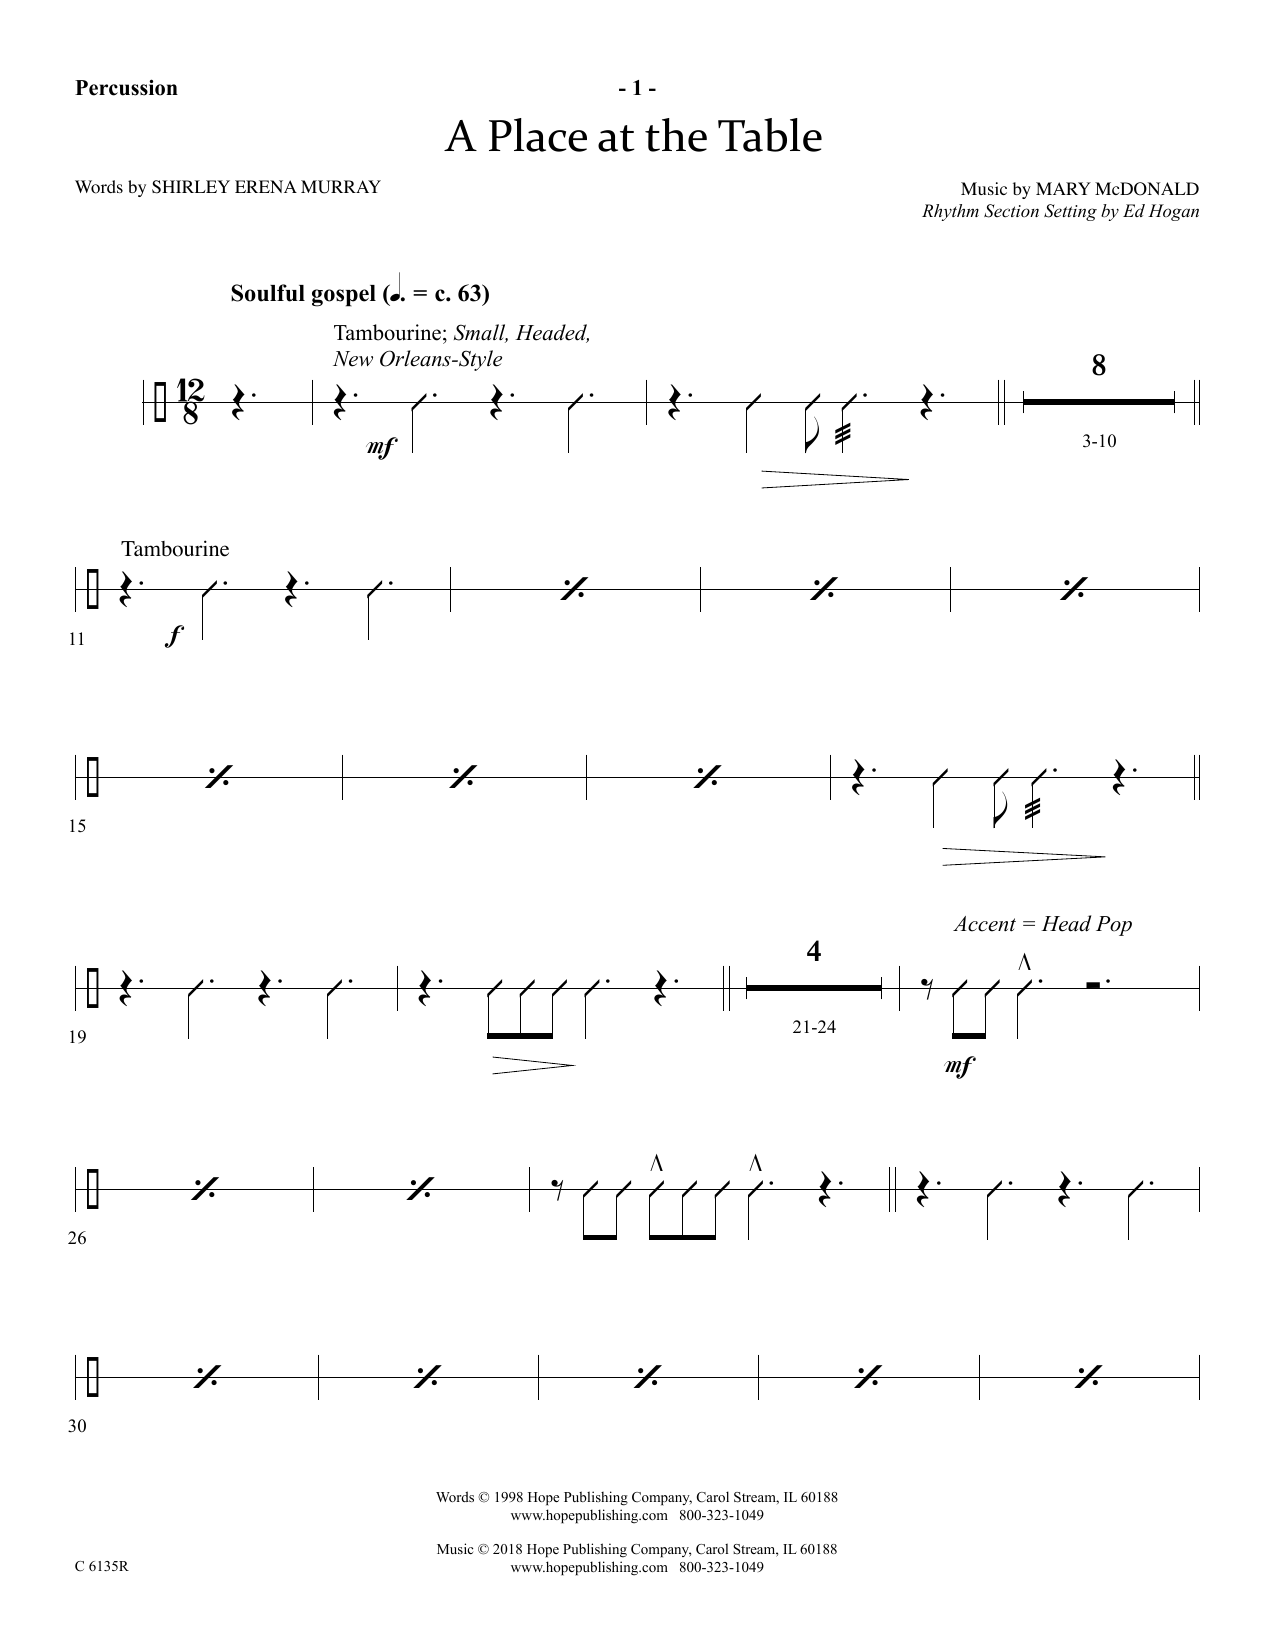 Download Ed Hogan A Place At The Table - Percussion Sheet Music